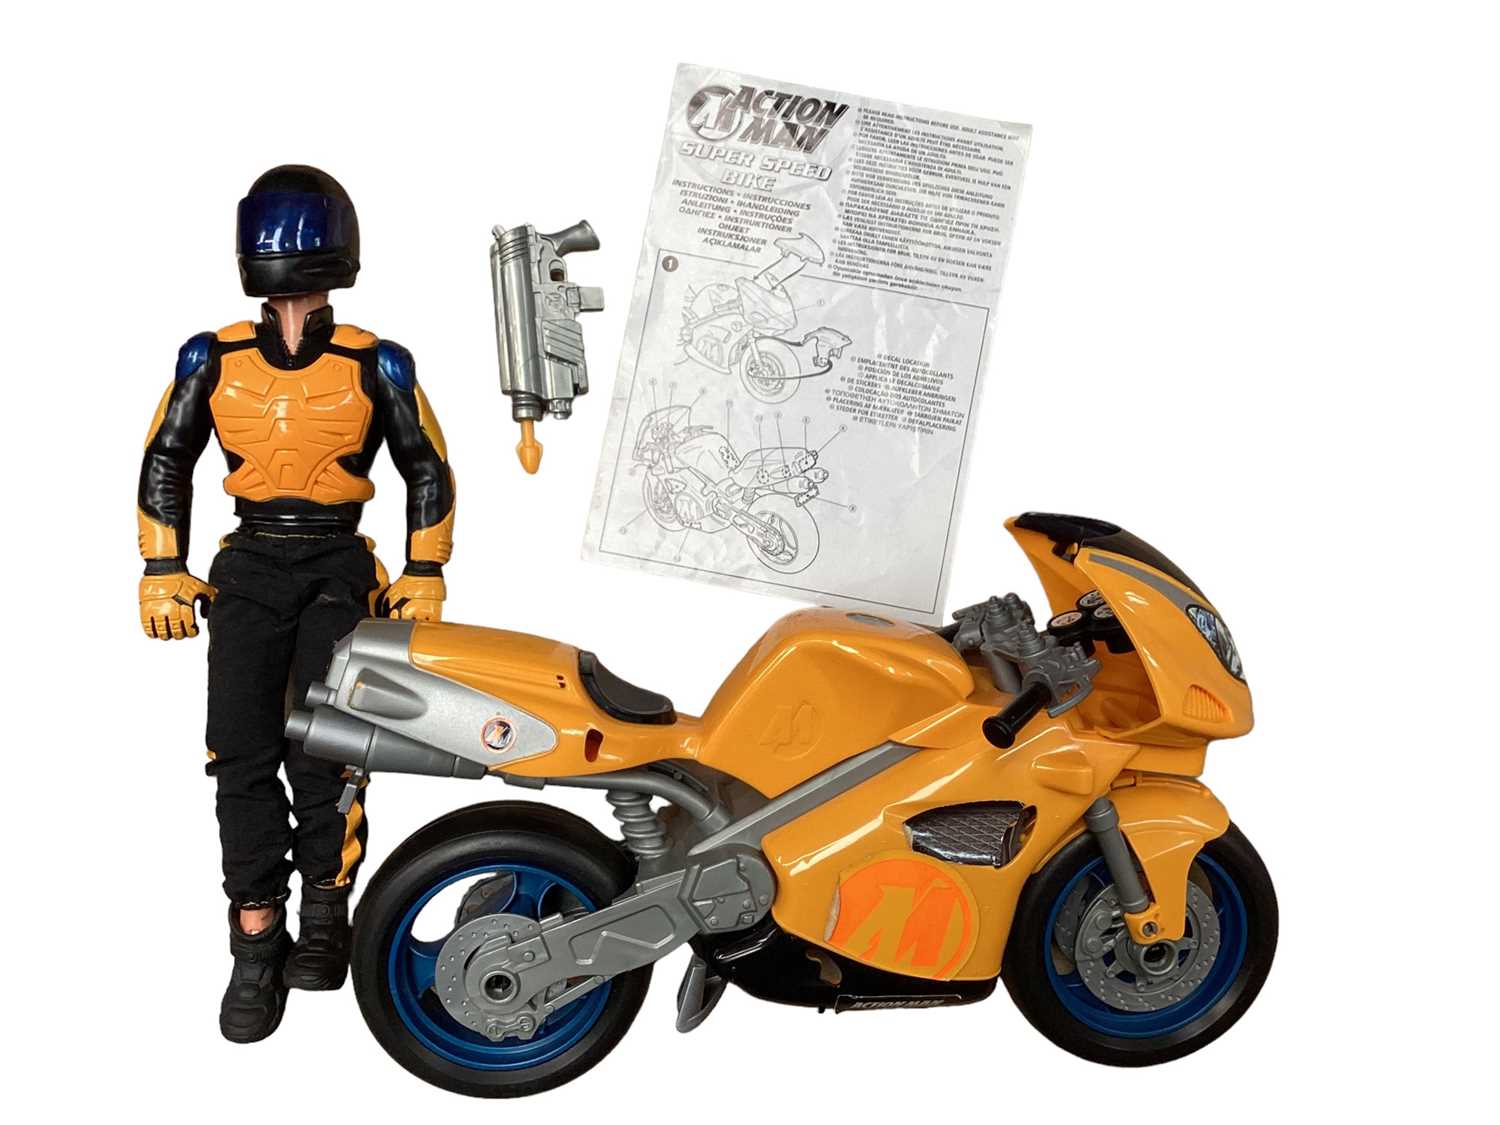 Hasbro Action Man Mission Grand Prix, boxed, plus motorcycle, two action figures and captain Scarlet - Image 3 of 3